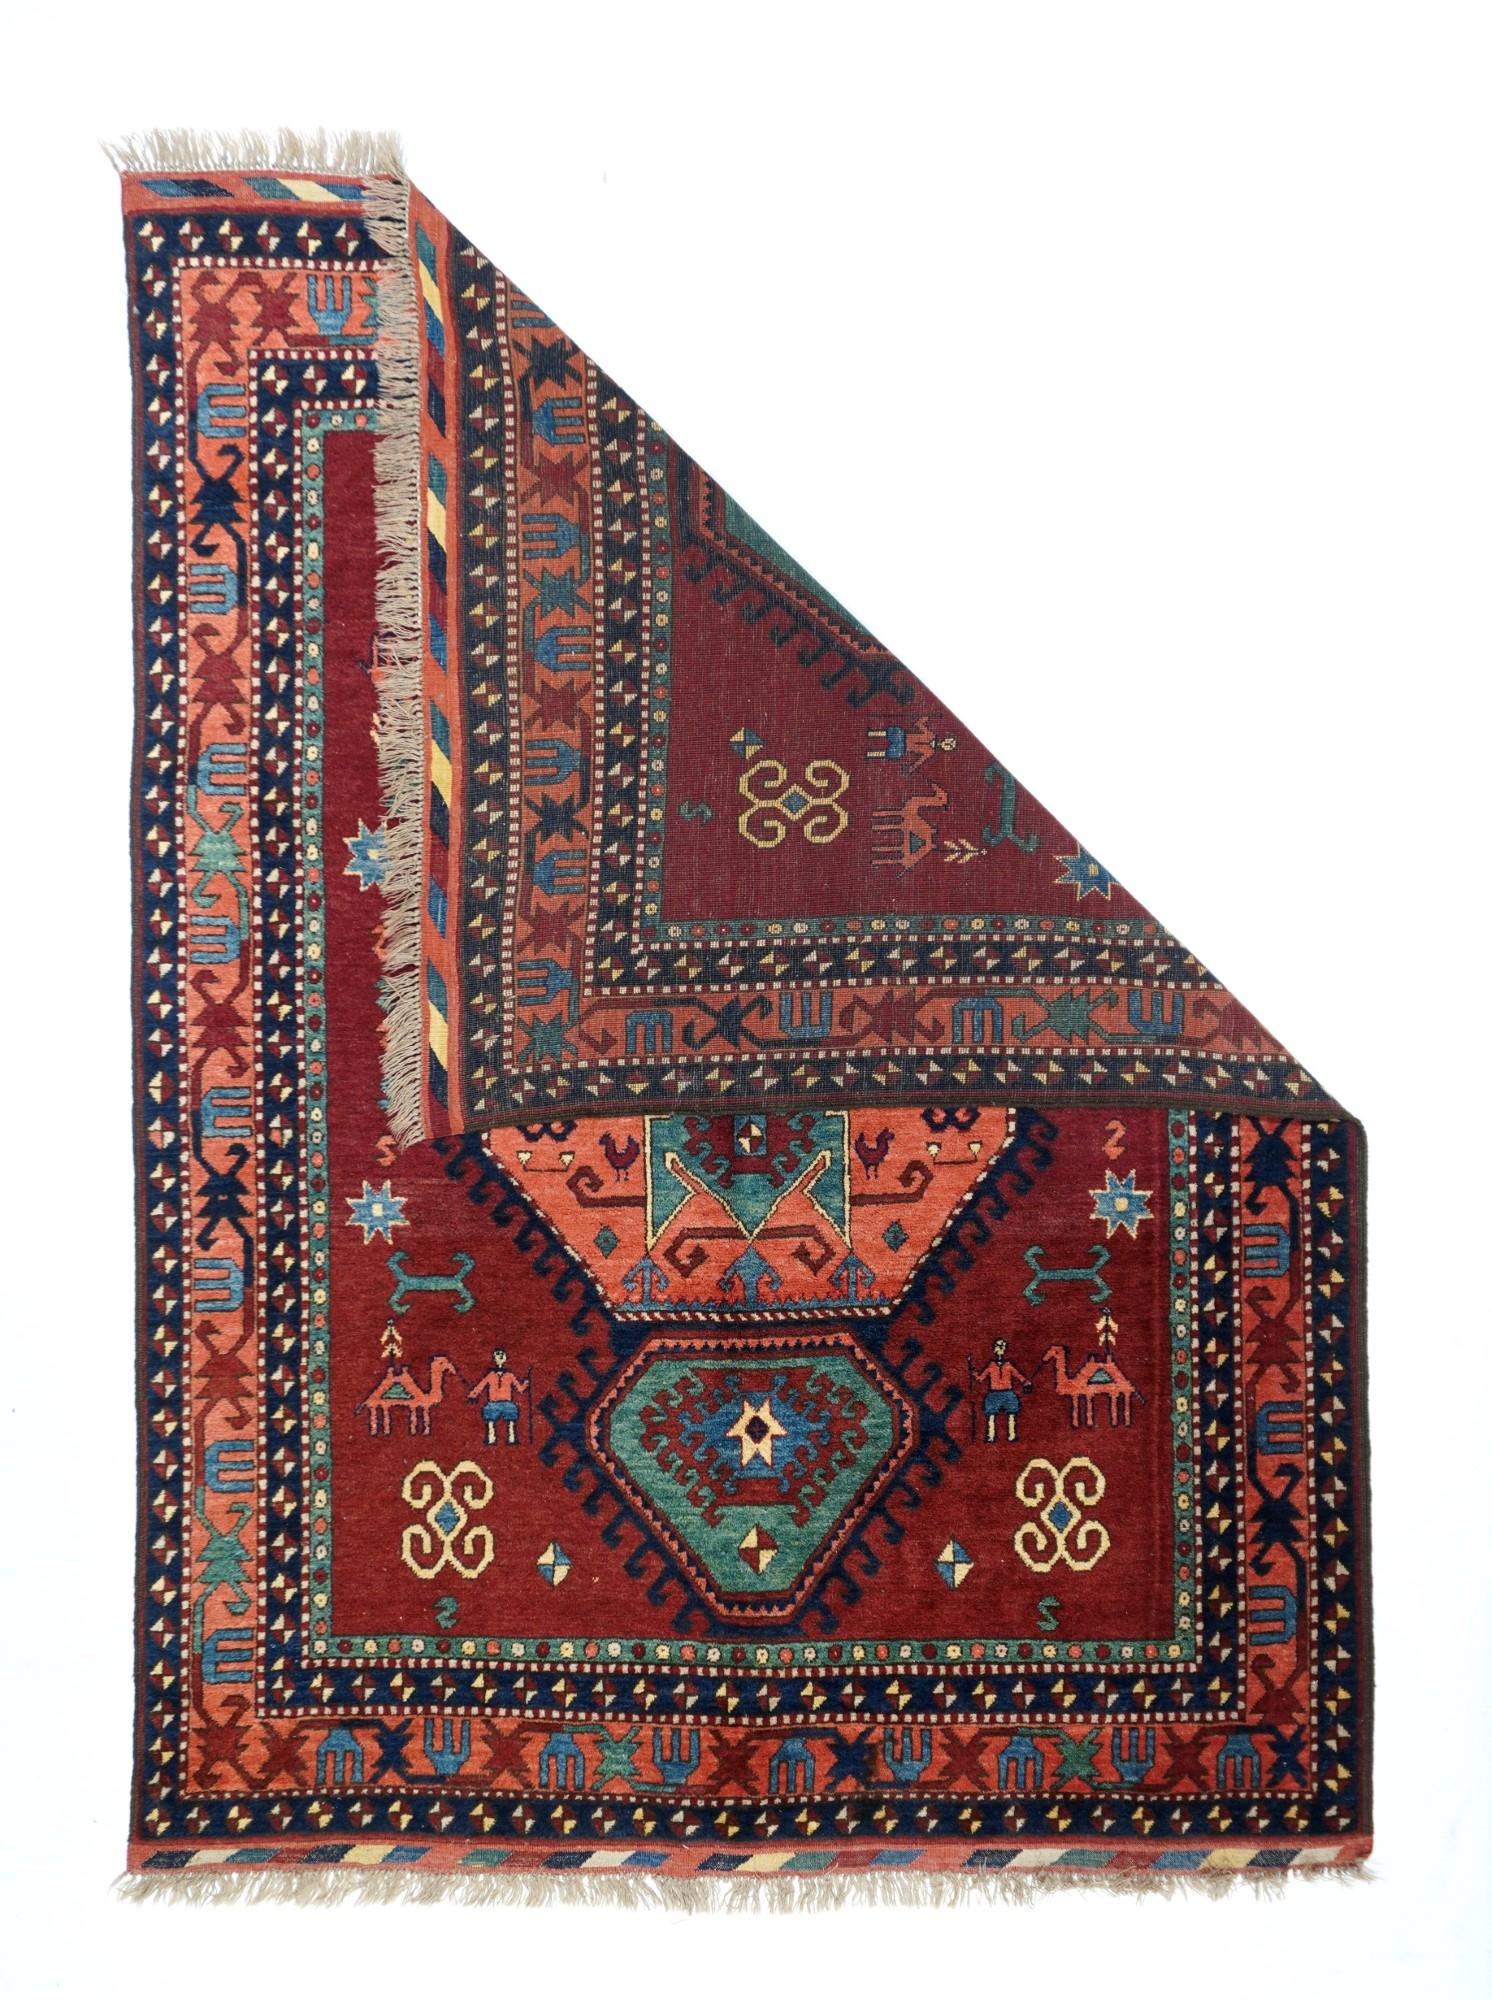 Vintage Kazak Design rug 5'4'' x 7'1''. This modern interpretation of a classic shows the characteristic octagonal medallion with a teal geometric palmette central cross. Eccentric green pendant lesser medallions. Hooked edges all around. Four